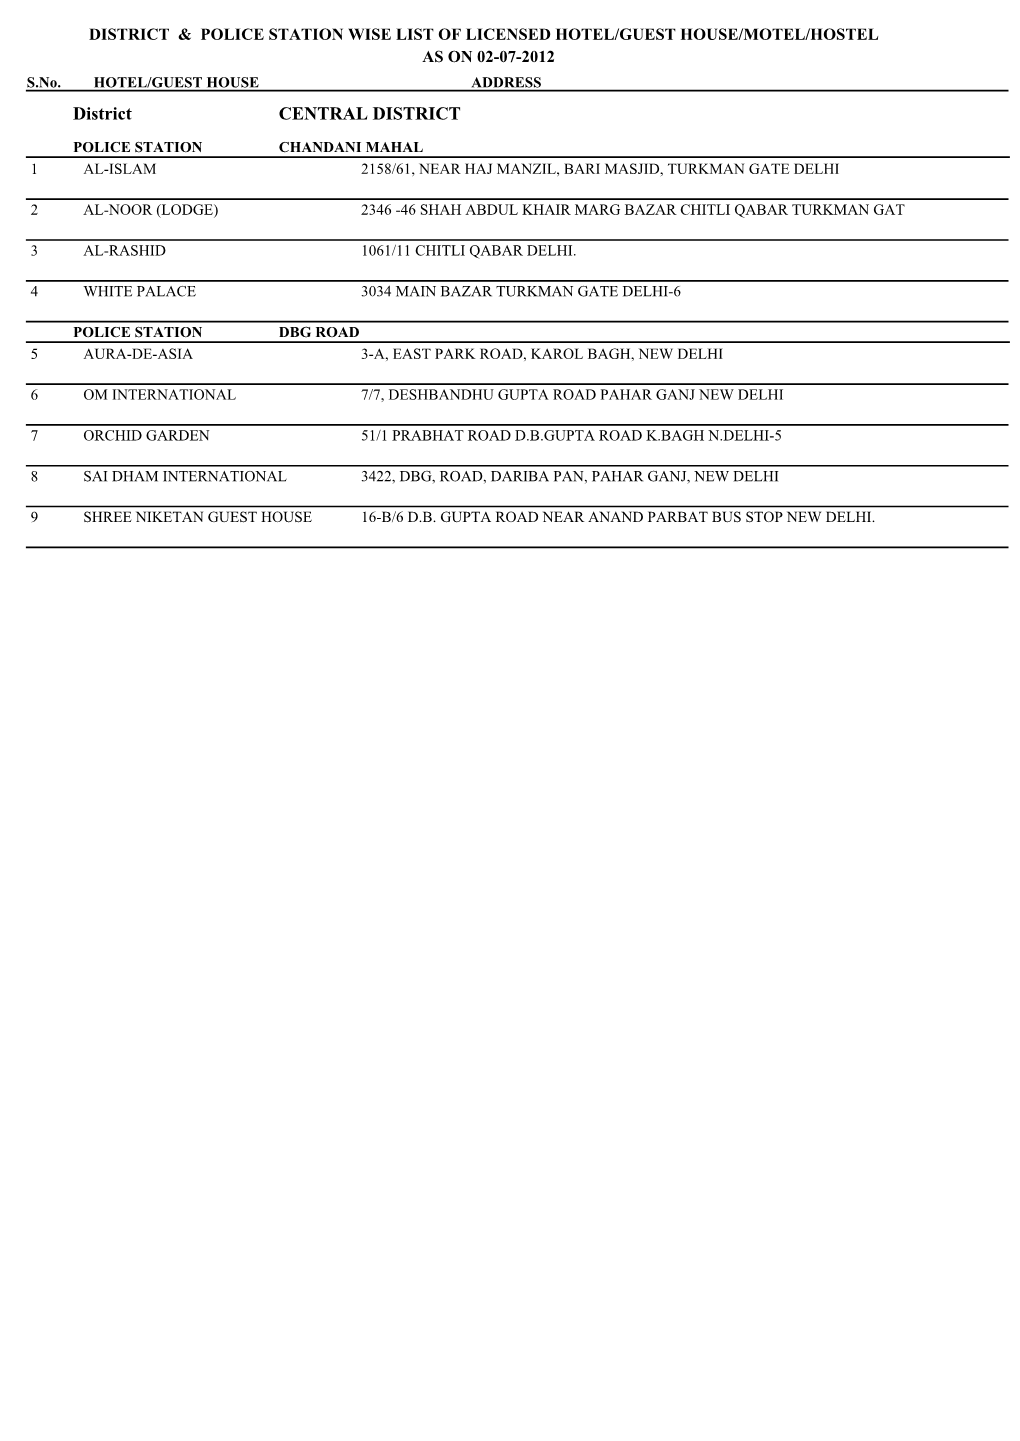 District & Police Station Wise List of Licensed Hotel/Guest House/Motel/Hostel As on 02-07-2012